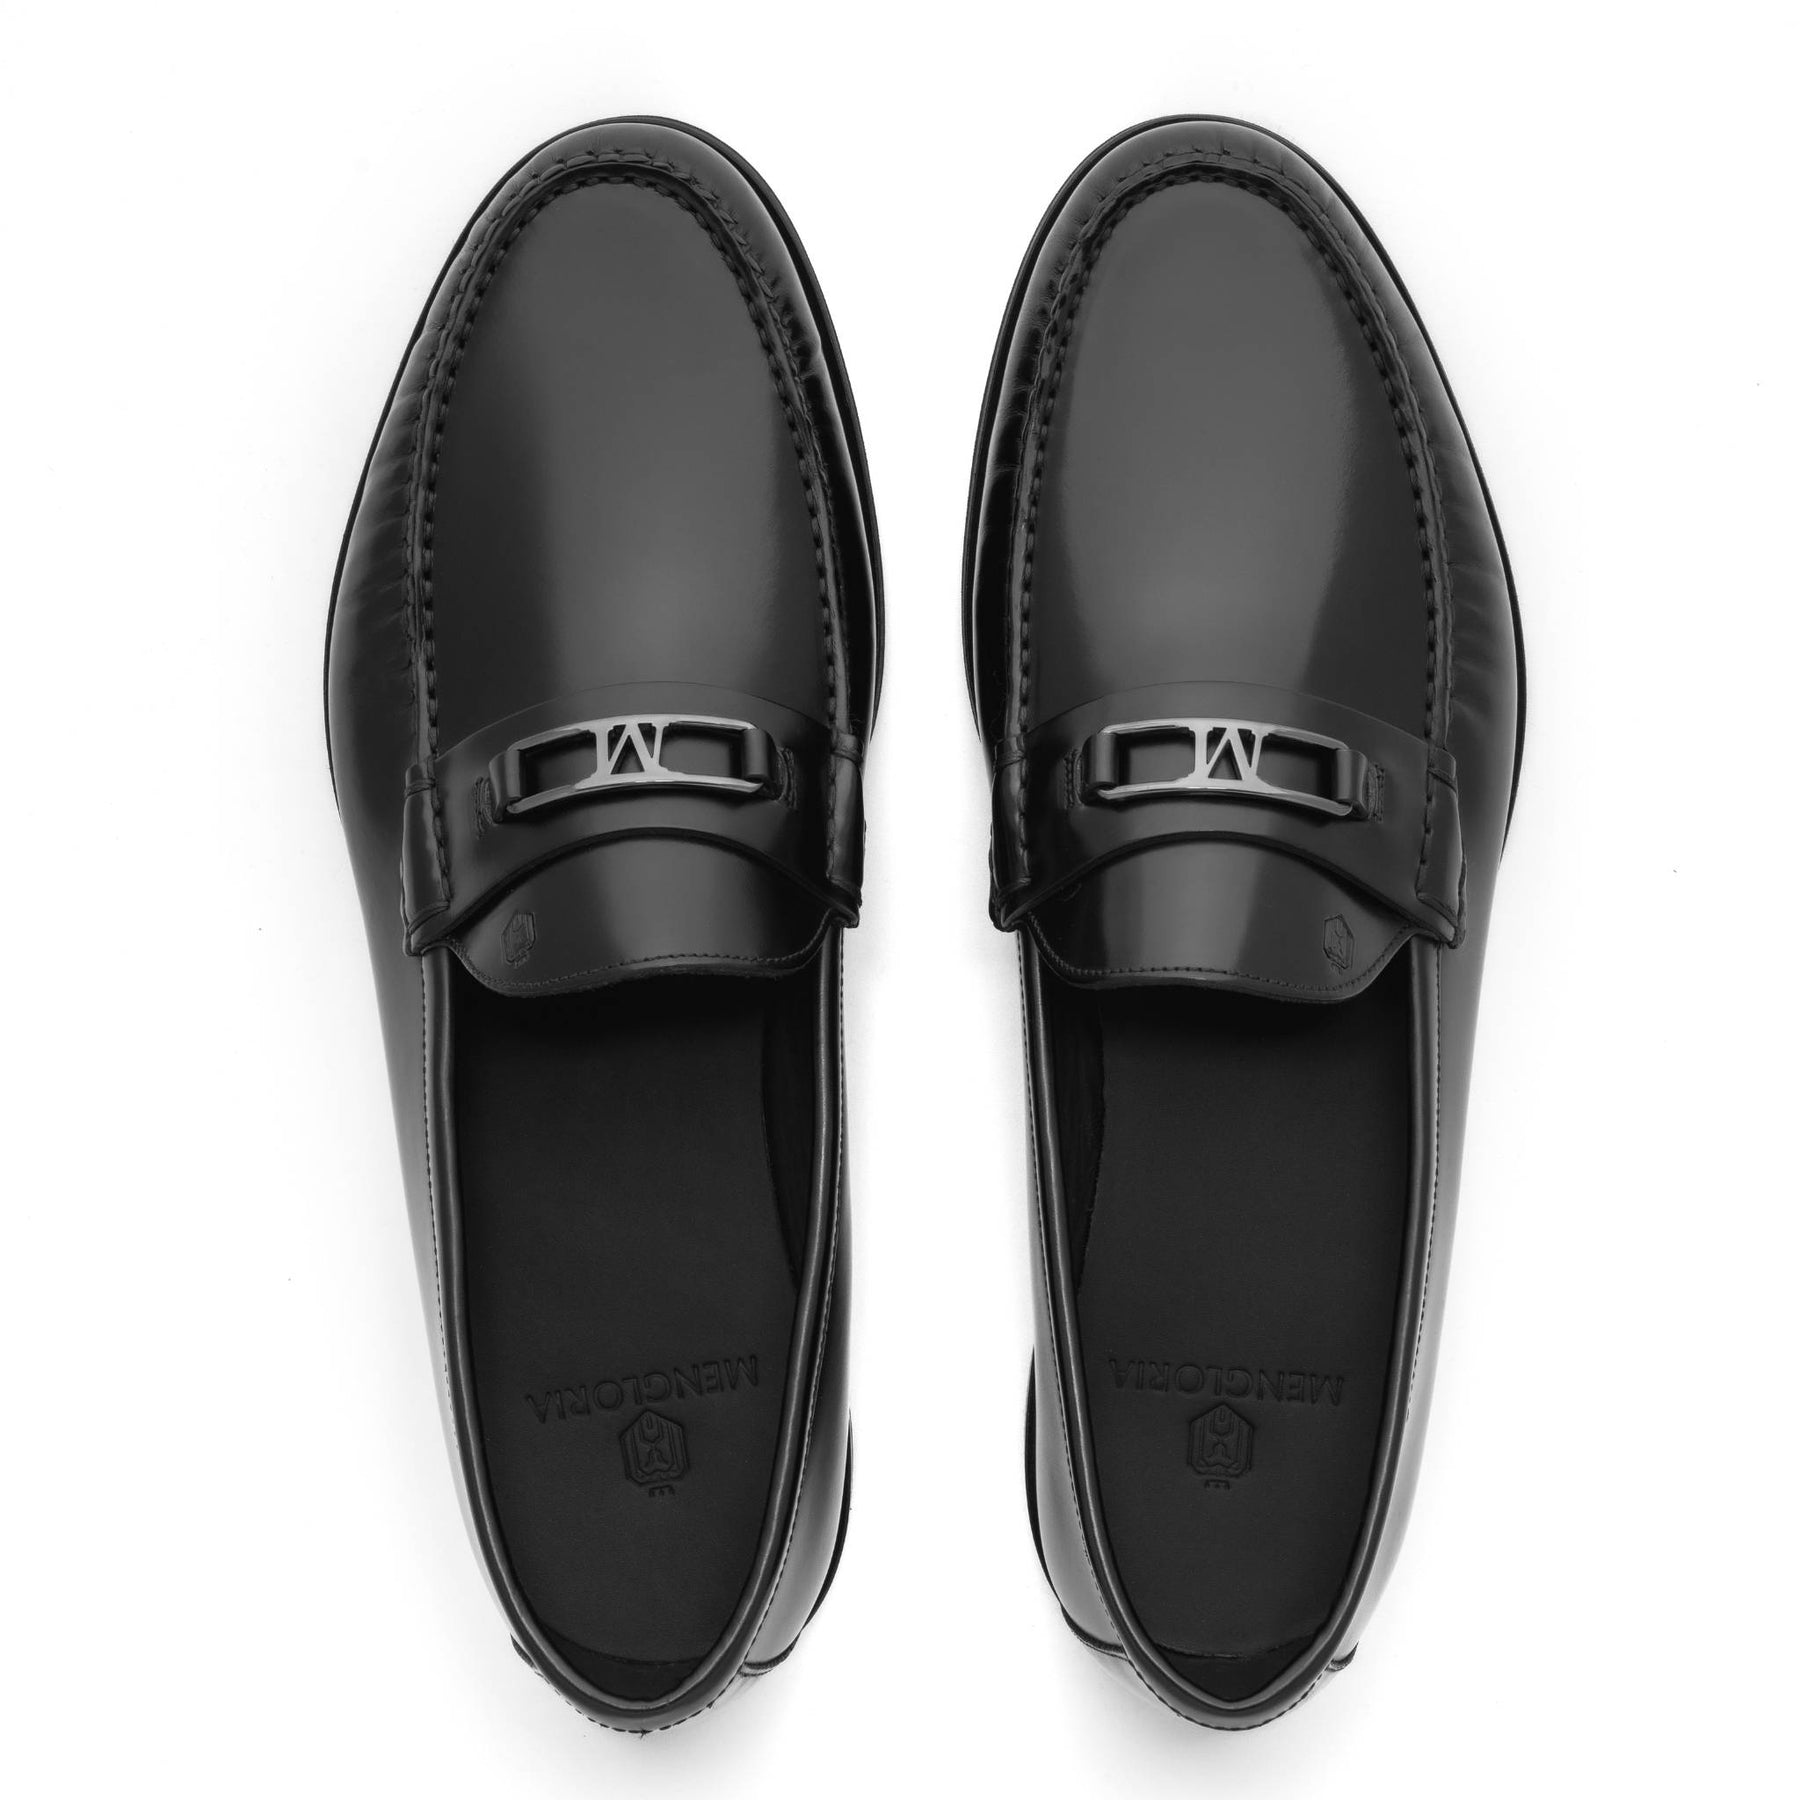 NEW LOUIS VUITTON MAJOR MOCCASIN SHOES 9 43 NEW SHOES BLACK LEATHER